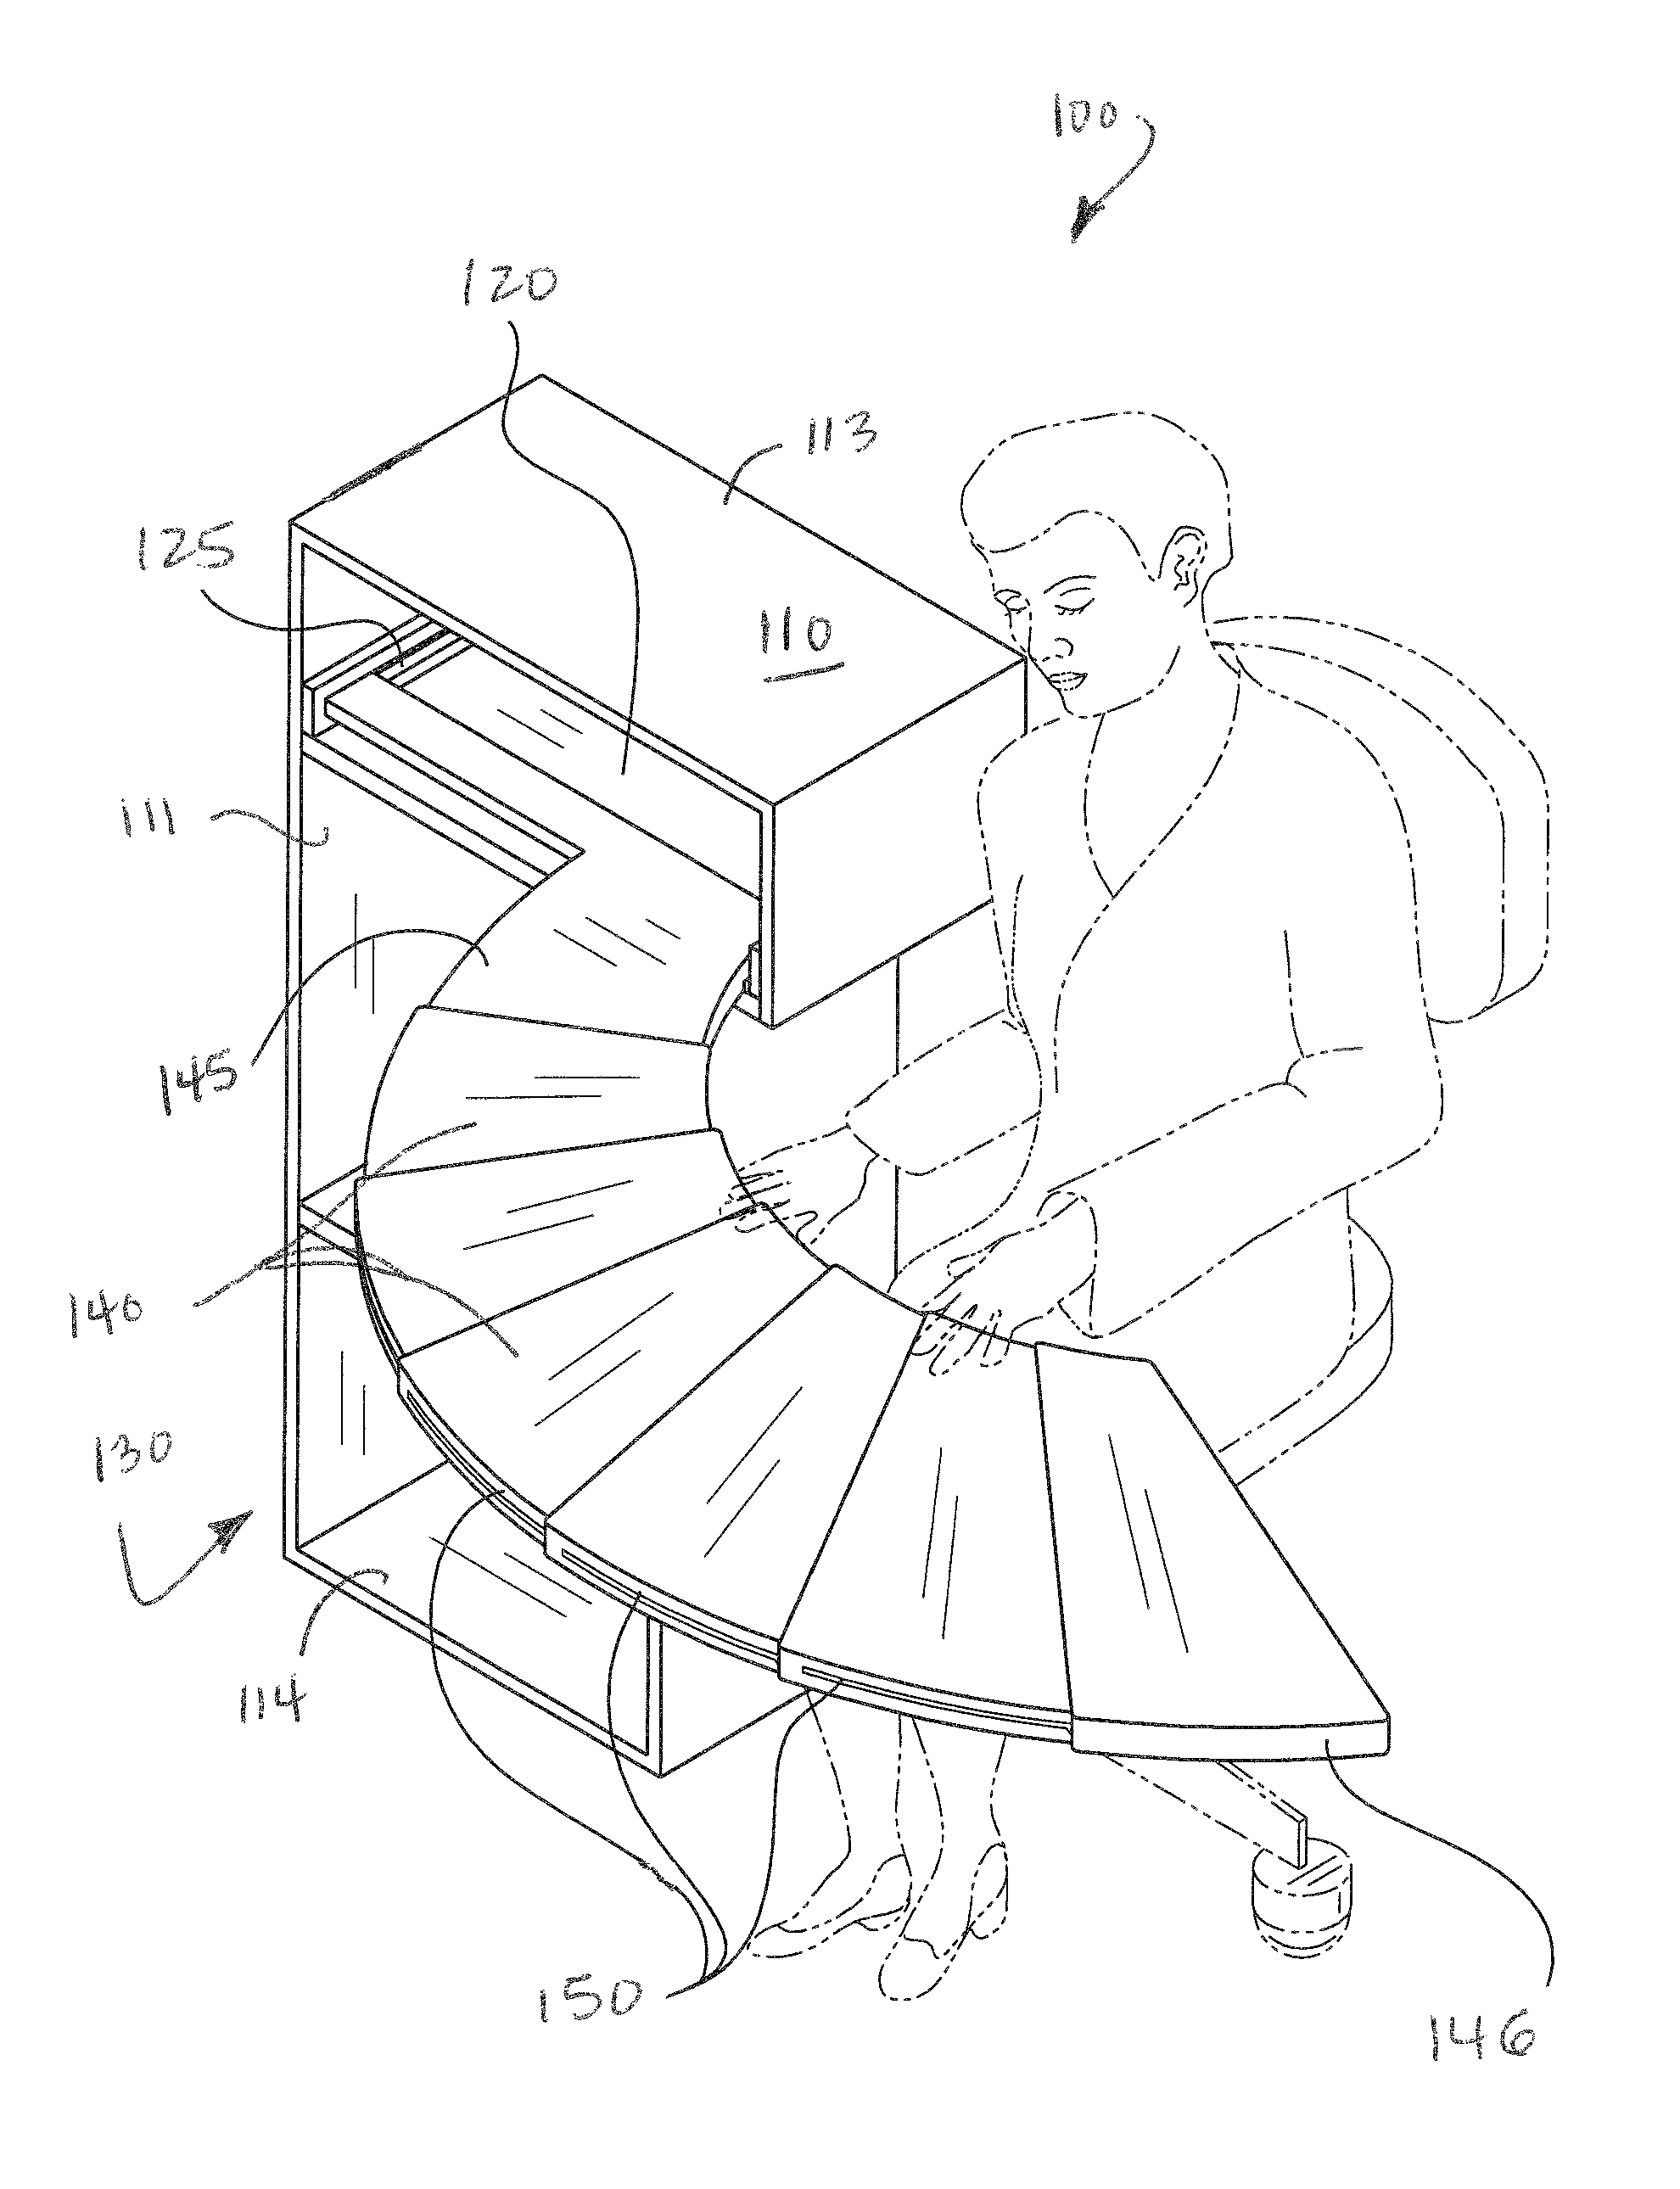 Expandable table device for diaper changes